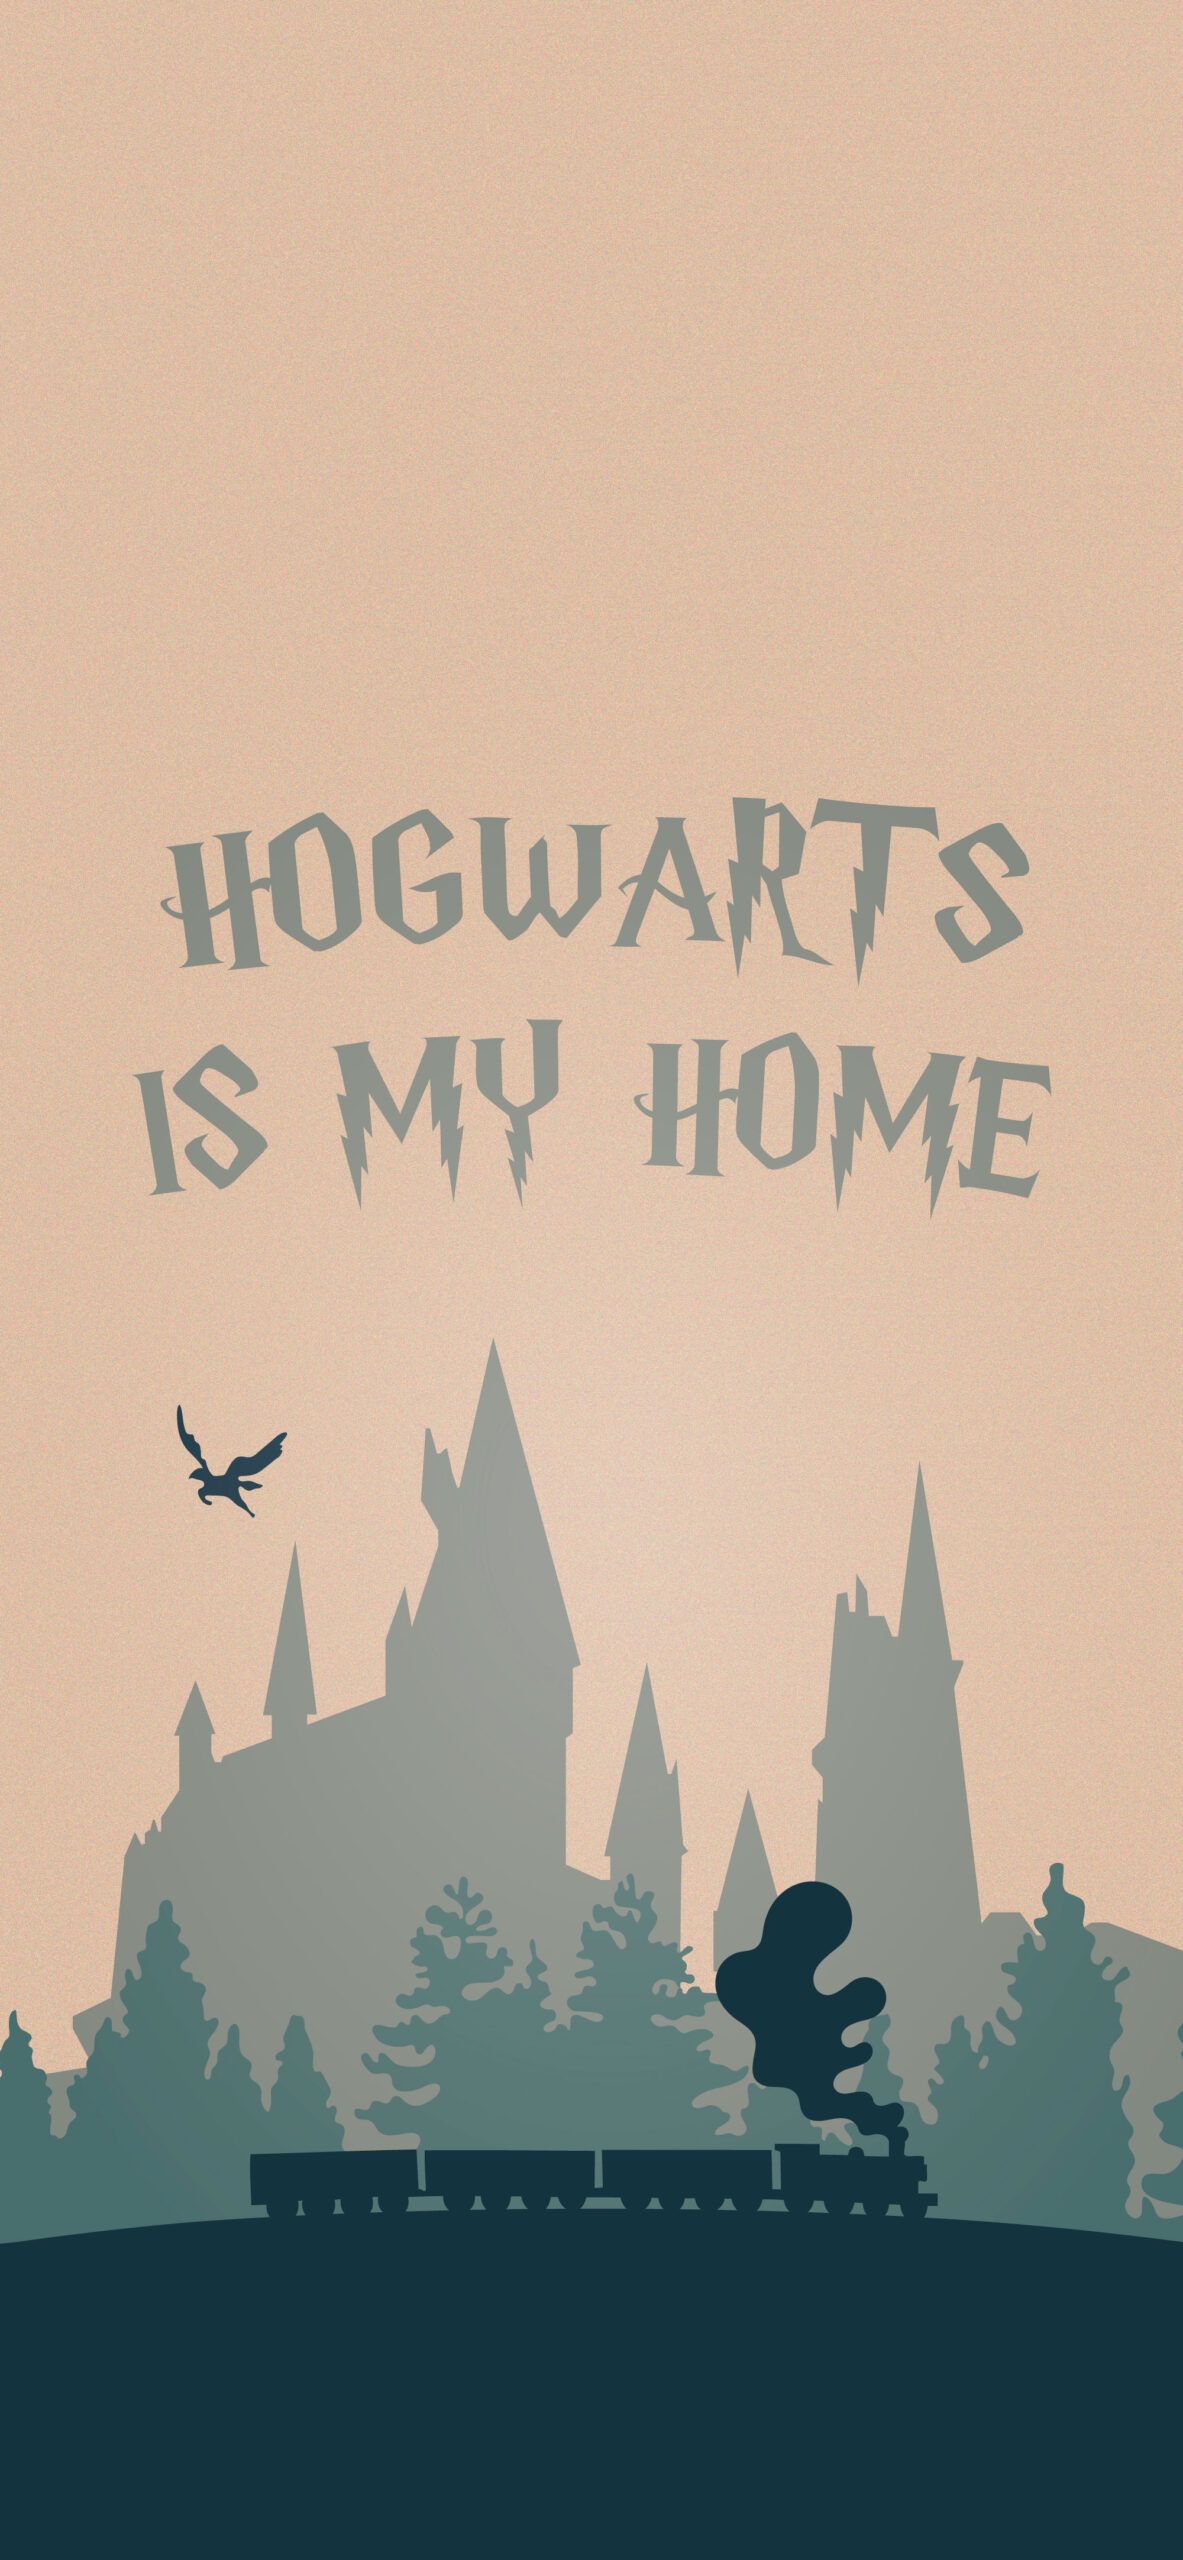 Harry Potter Wallpaper for Phone with Hogwarts